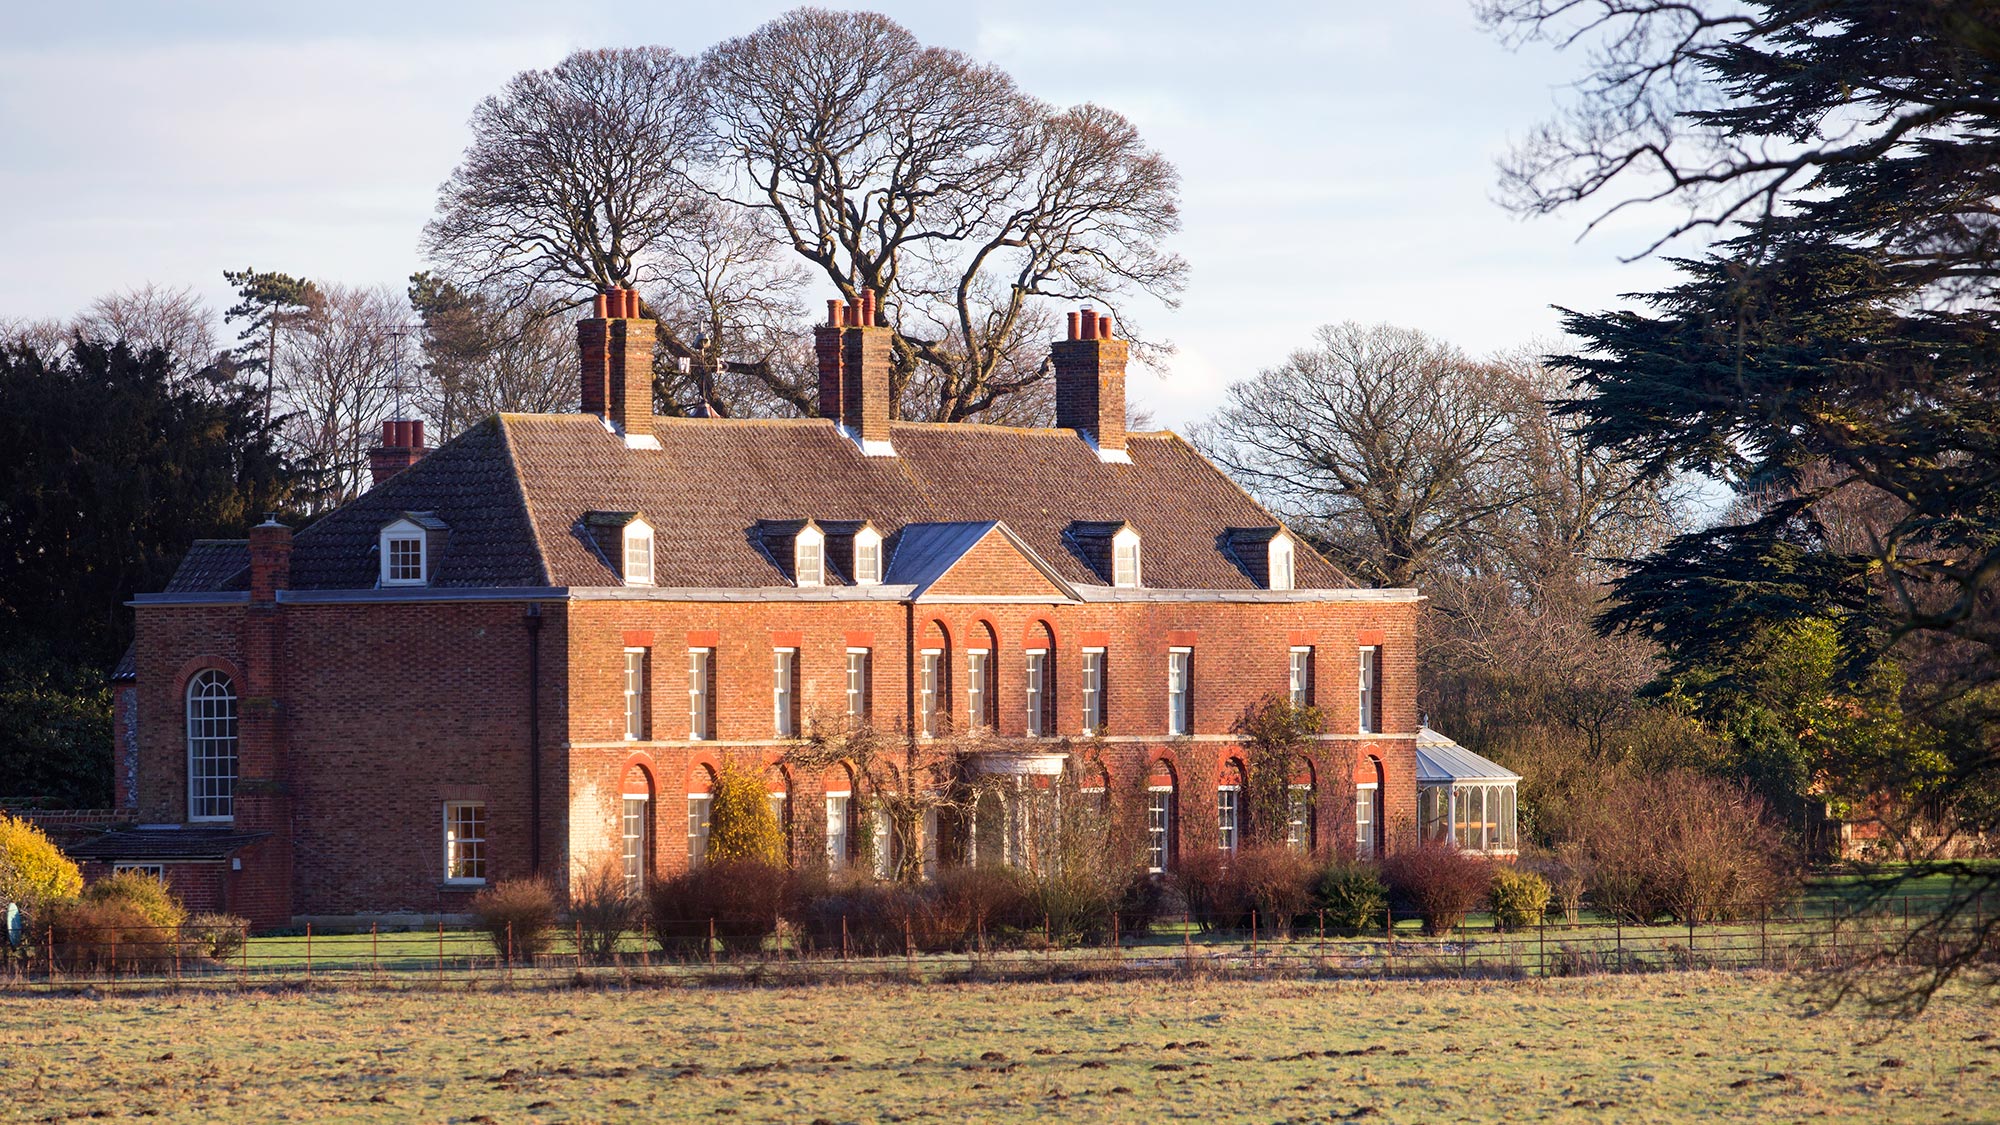 Prince William and Kate's Anmer Hall